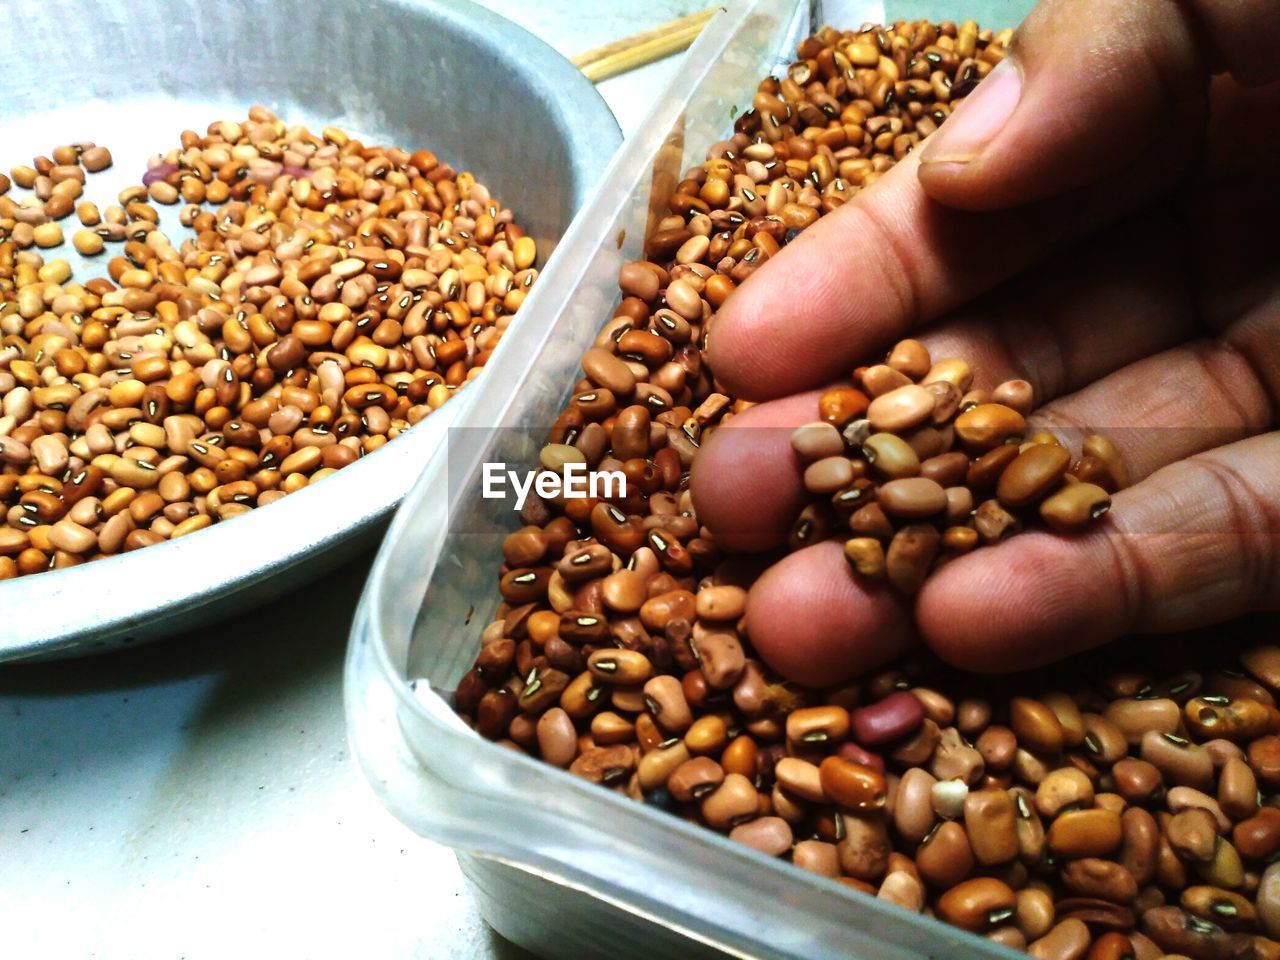 Evaluating the qualities of the beans